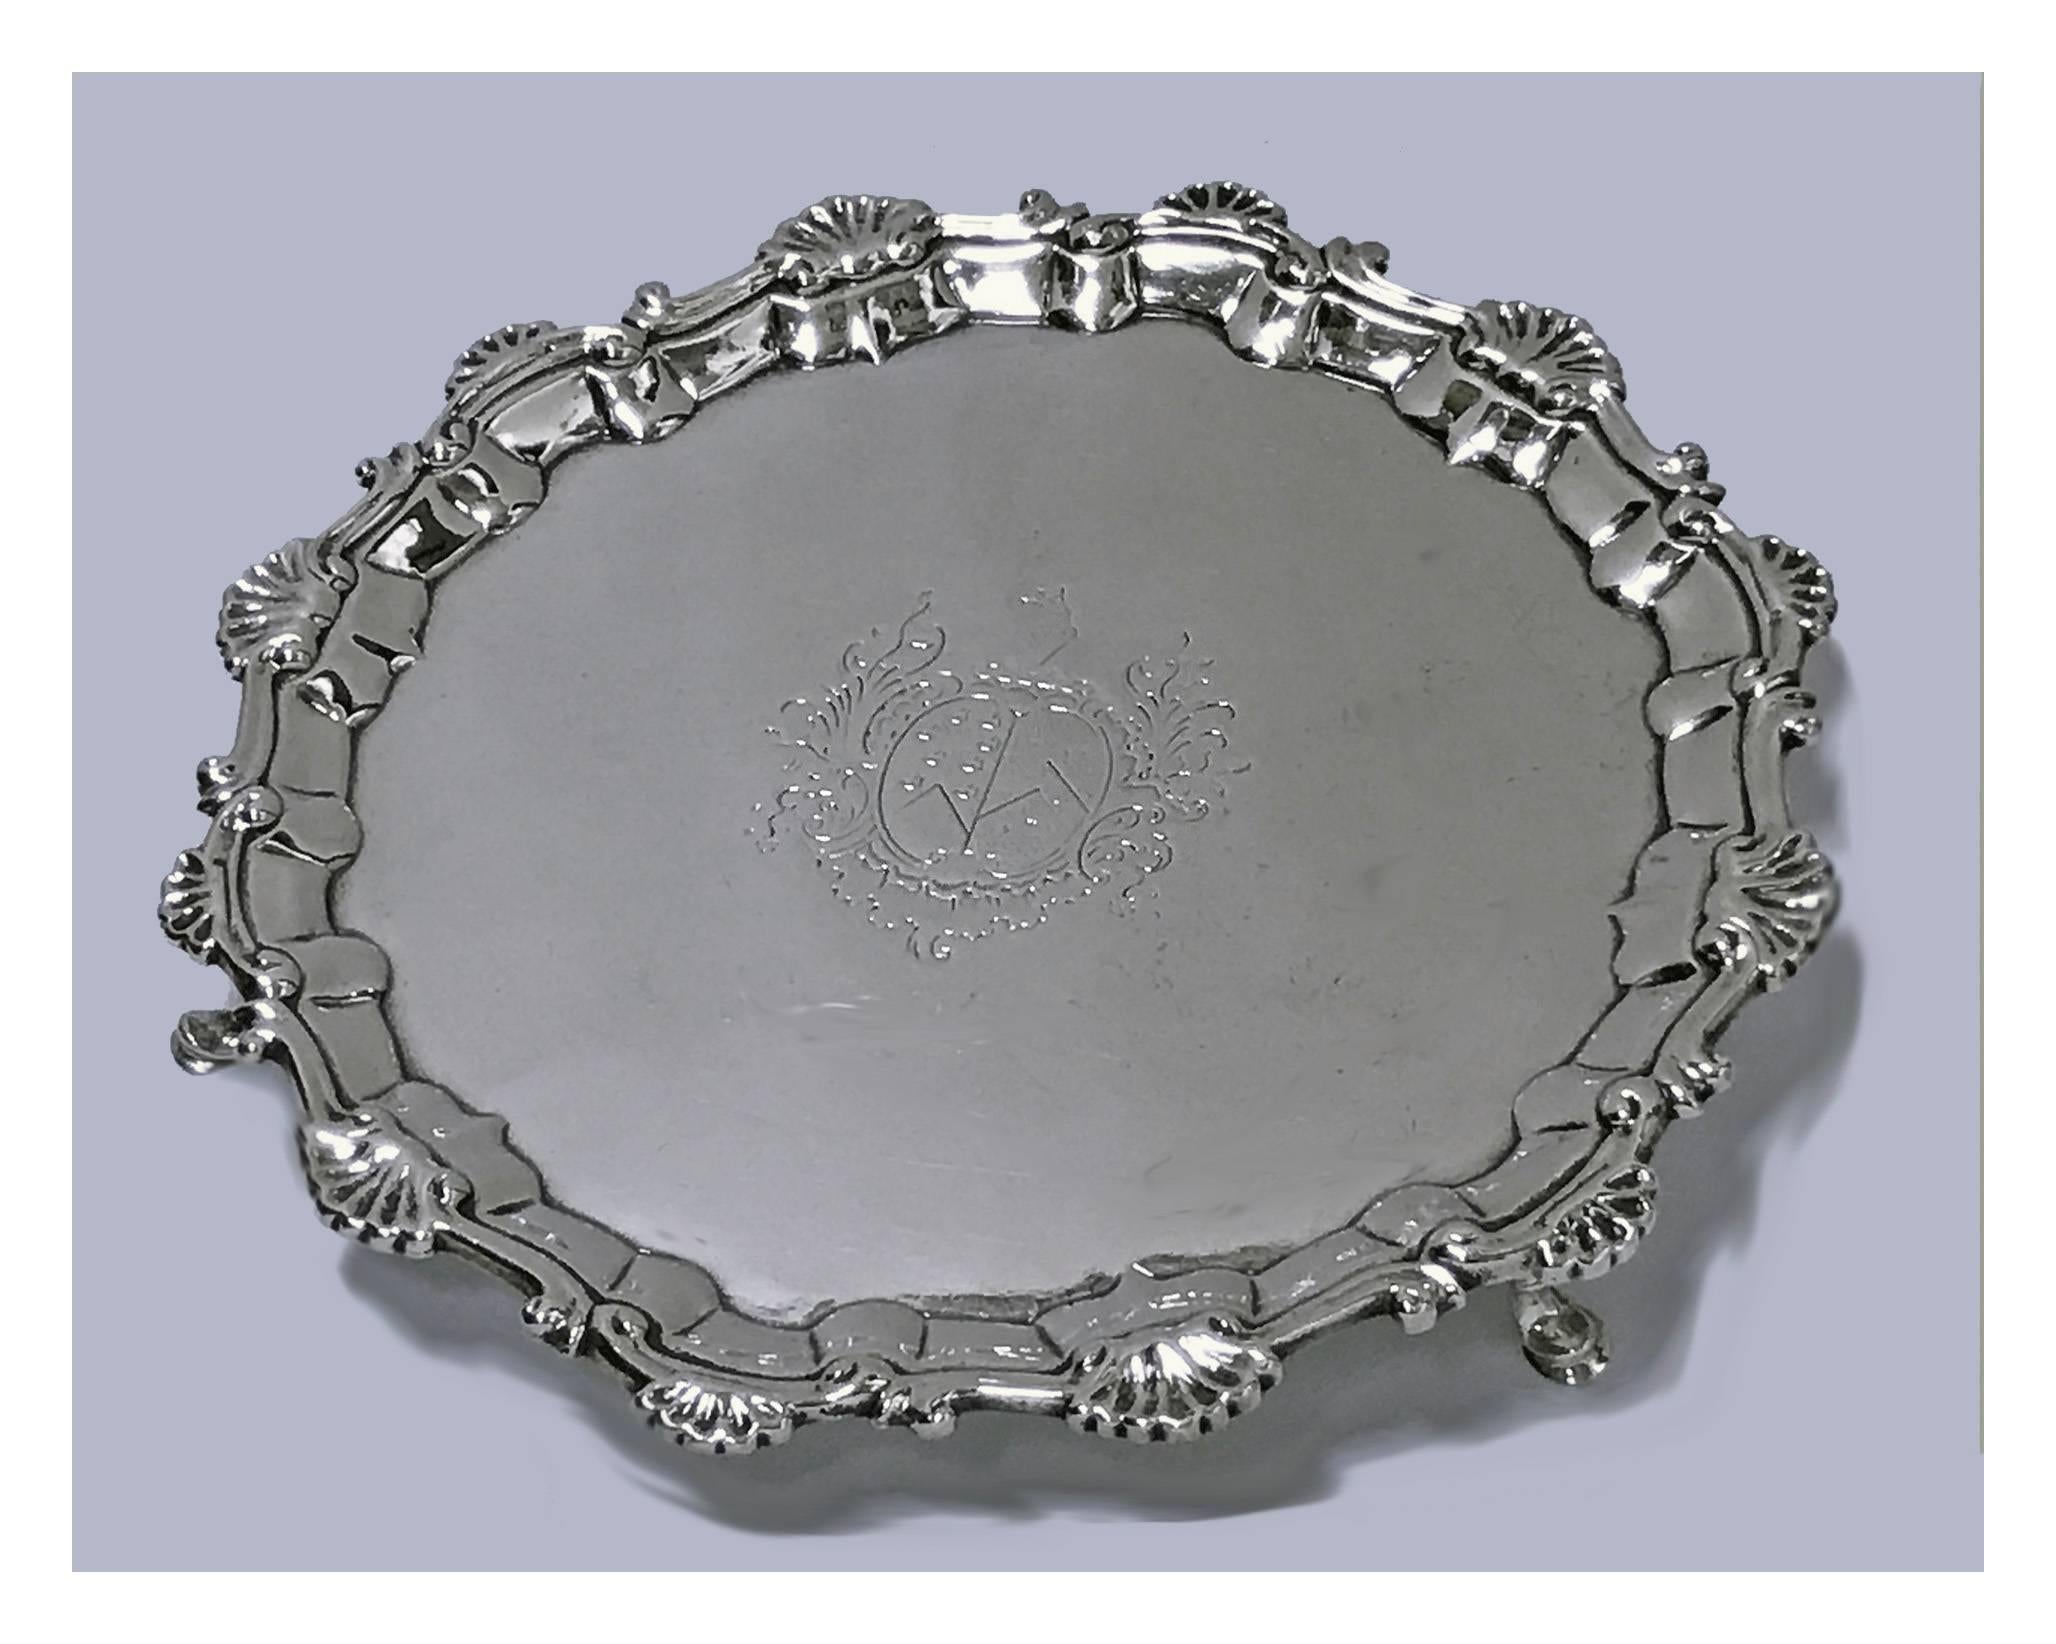 Georgian silver salver, London, 1757, William & Robert Peaston. The Salver with everted rim, Chippendale shaped border, engraved in the centre with marital coat of arms, border of applied scrolling decoration accented with alternating fluted shell